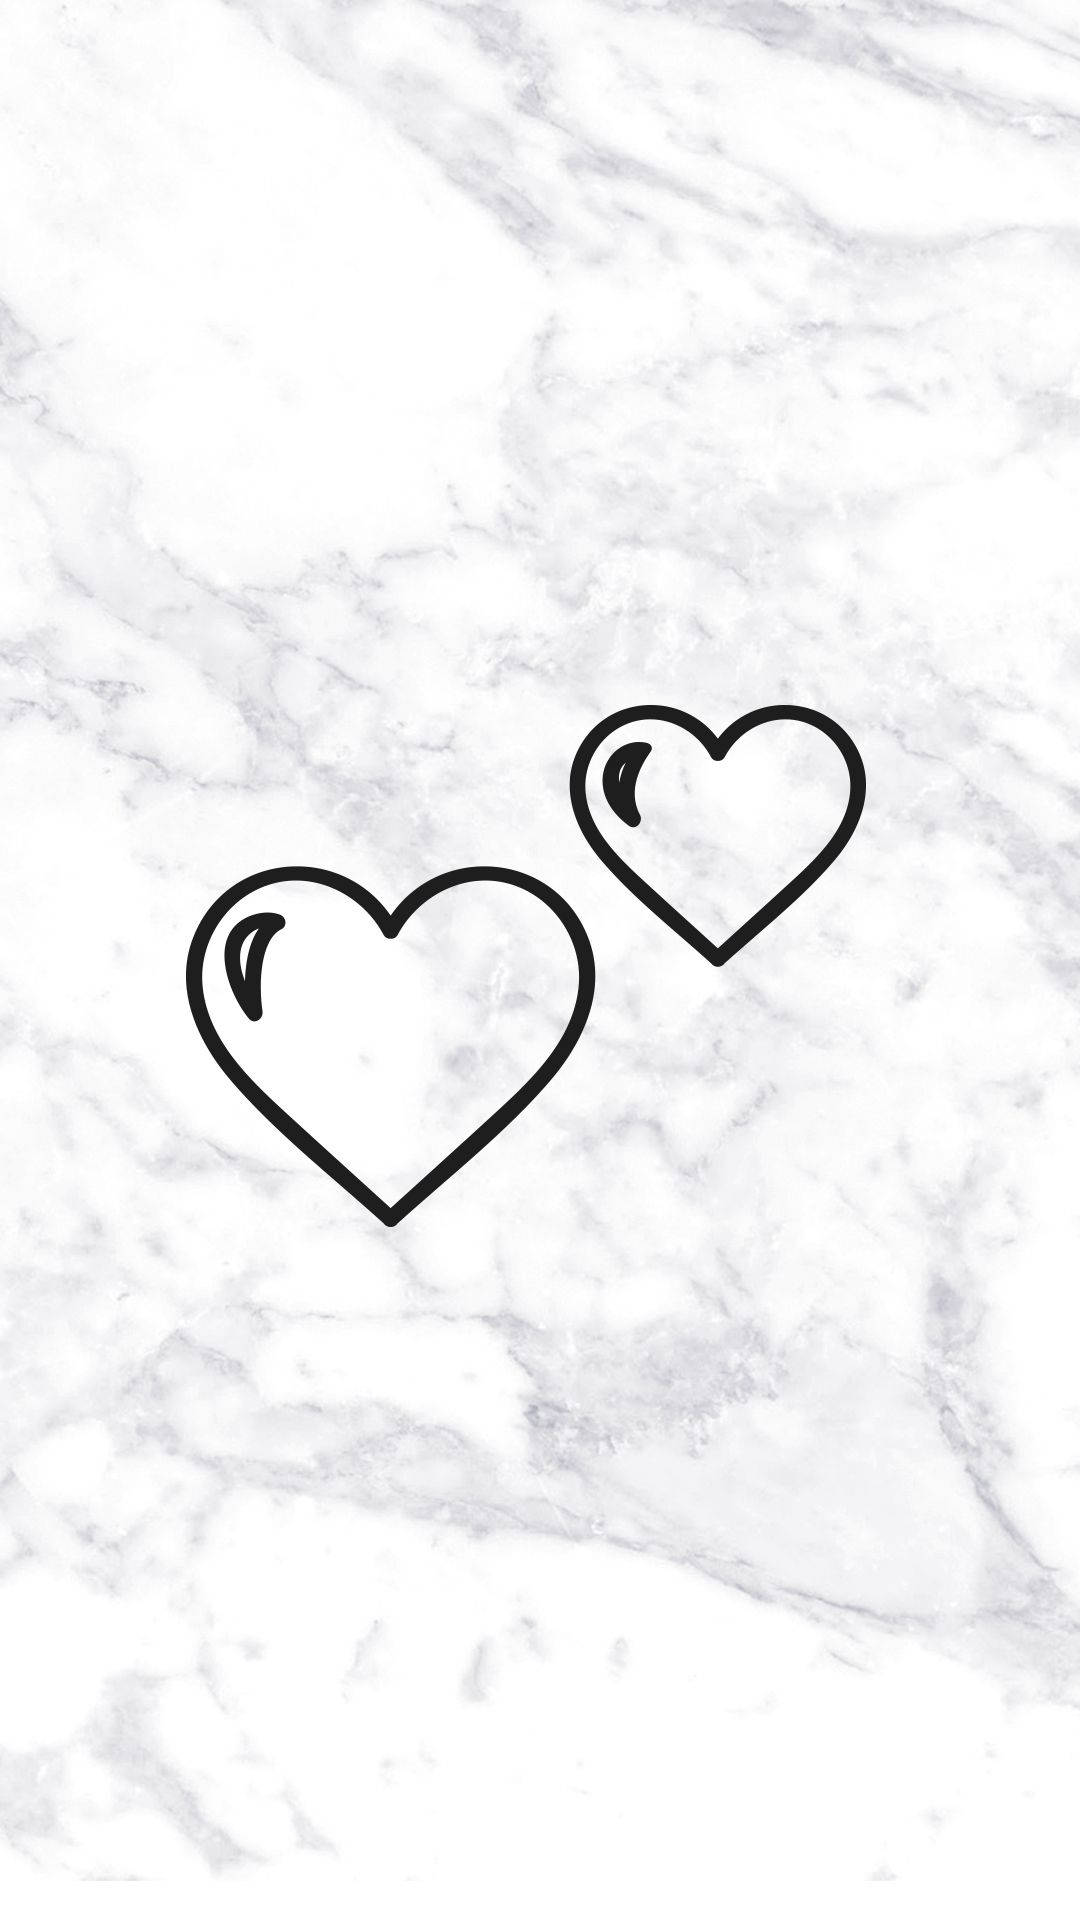 Two Hearts Black White Marble Iphone Wallpaper